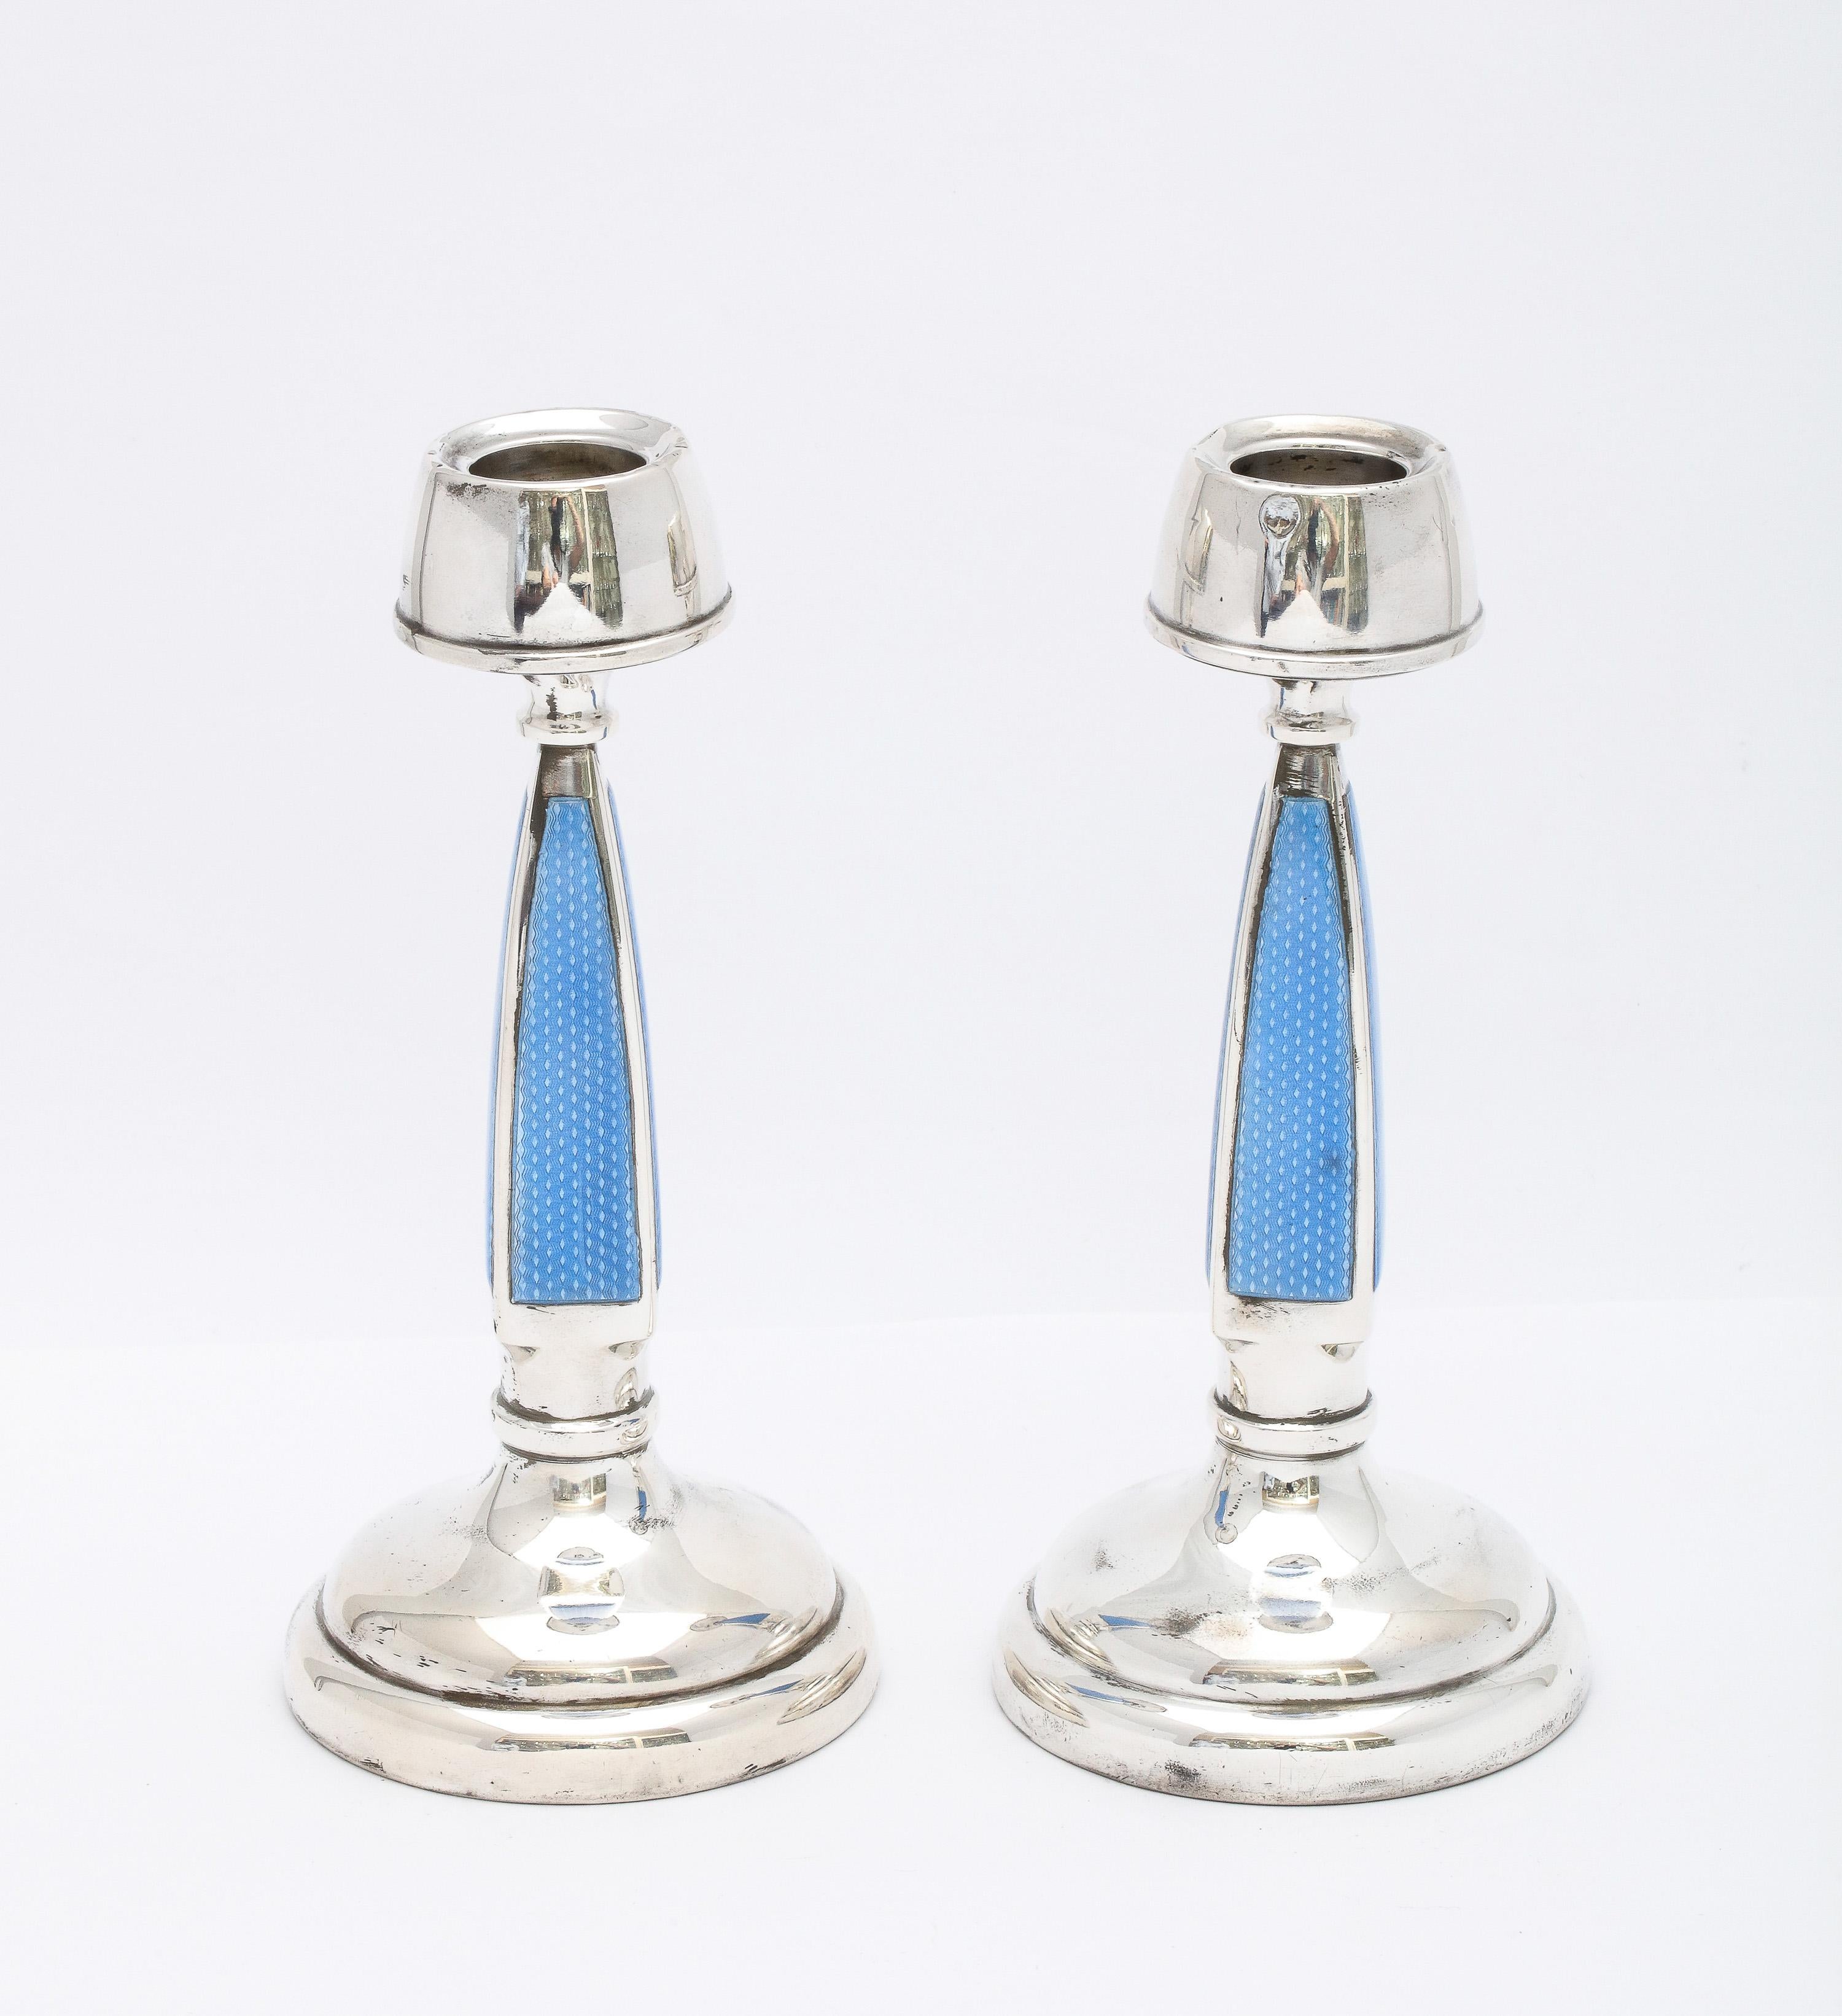 Rare pair of Art Deco, sterling silver and blue guilloche enamel candlesticks, Birmingham, England, year-hallmarked for 1927, A.L. Davenport - maker. The center of each four-sided column of each of the candlesticks is a lovely shade of blue